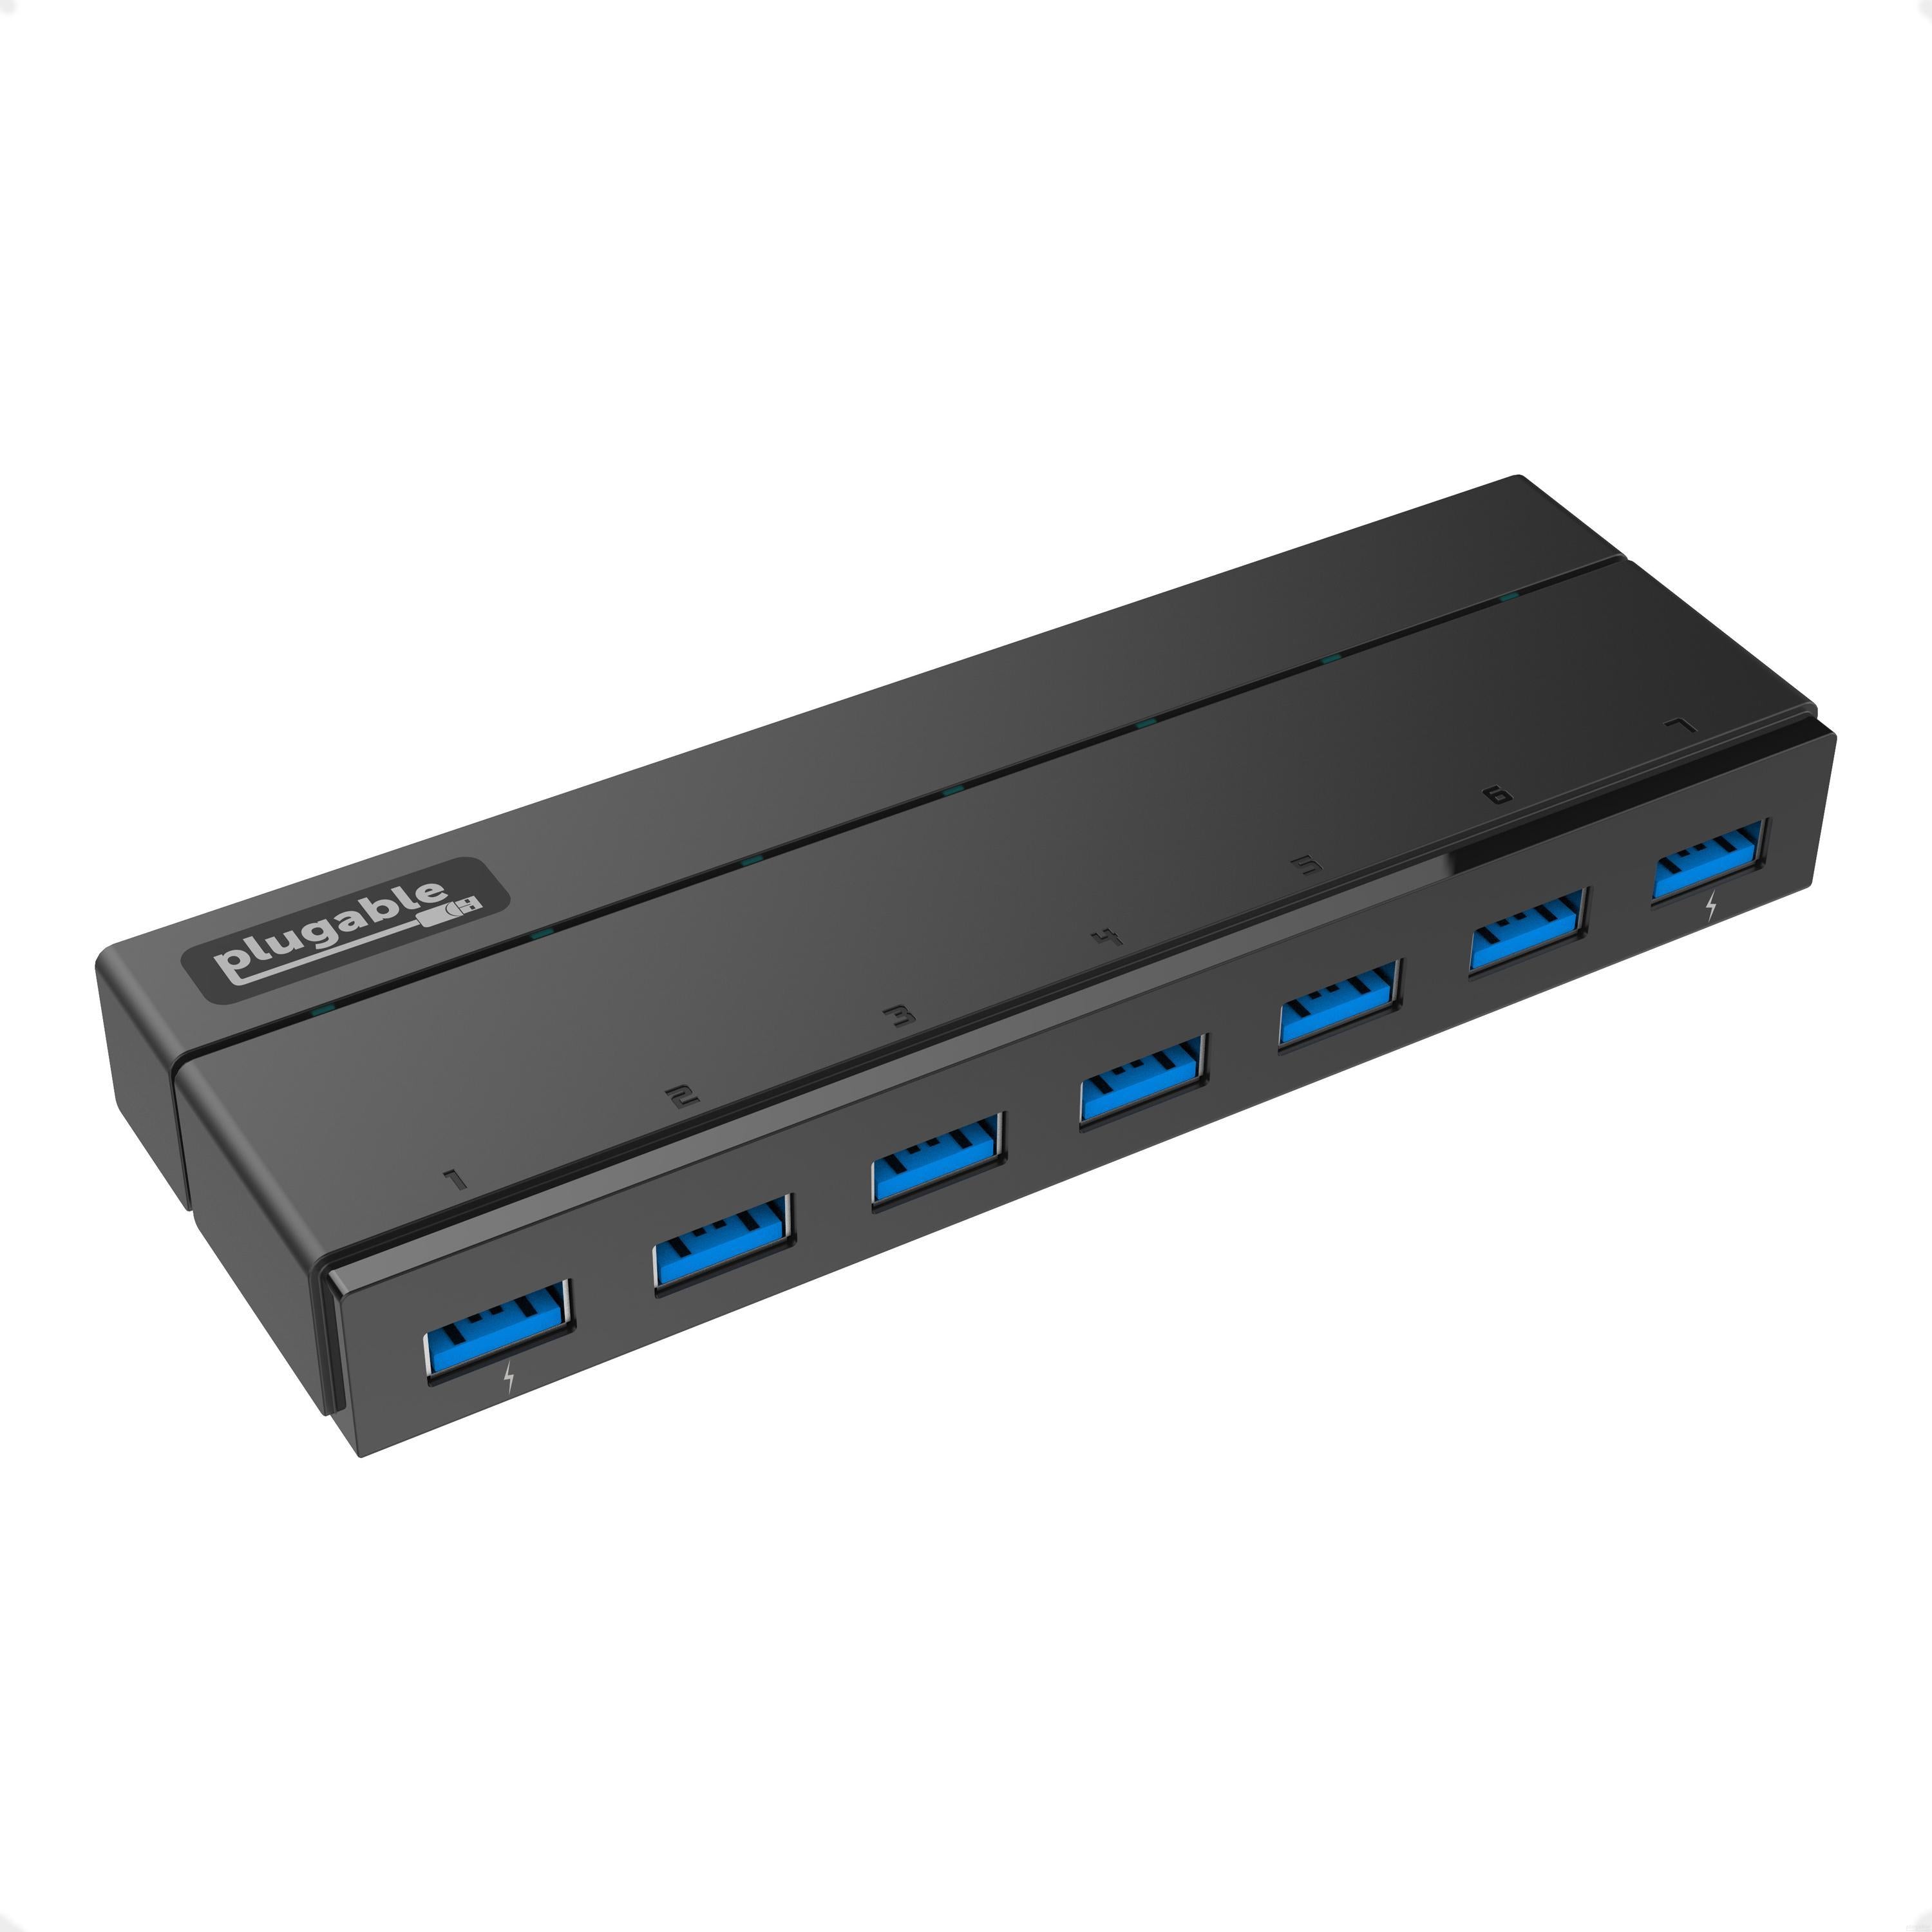 USB 3.0 7-Port Hub with 2 BC 1.2 Charging Ports and 36W Power Adapter